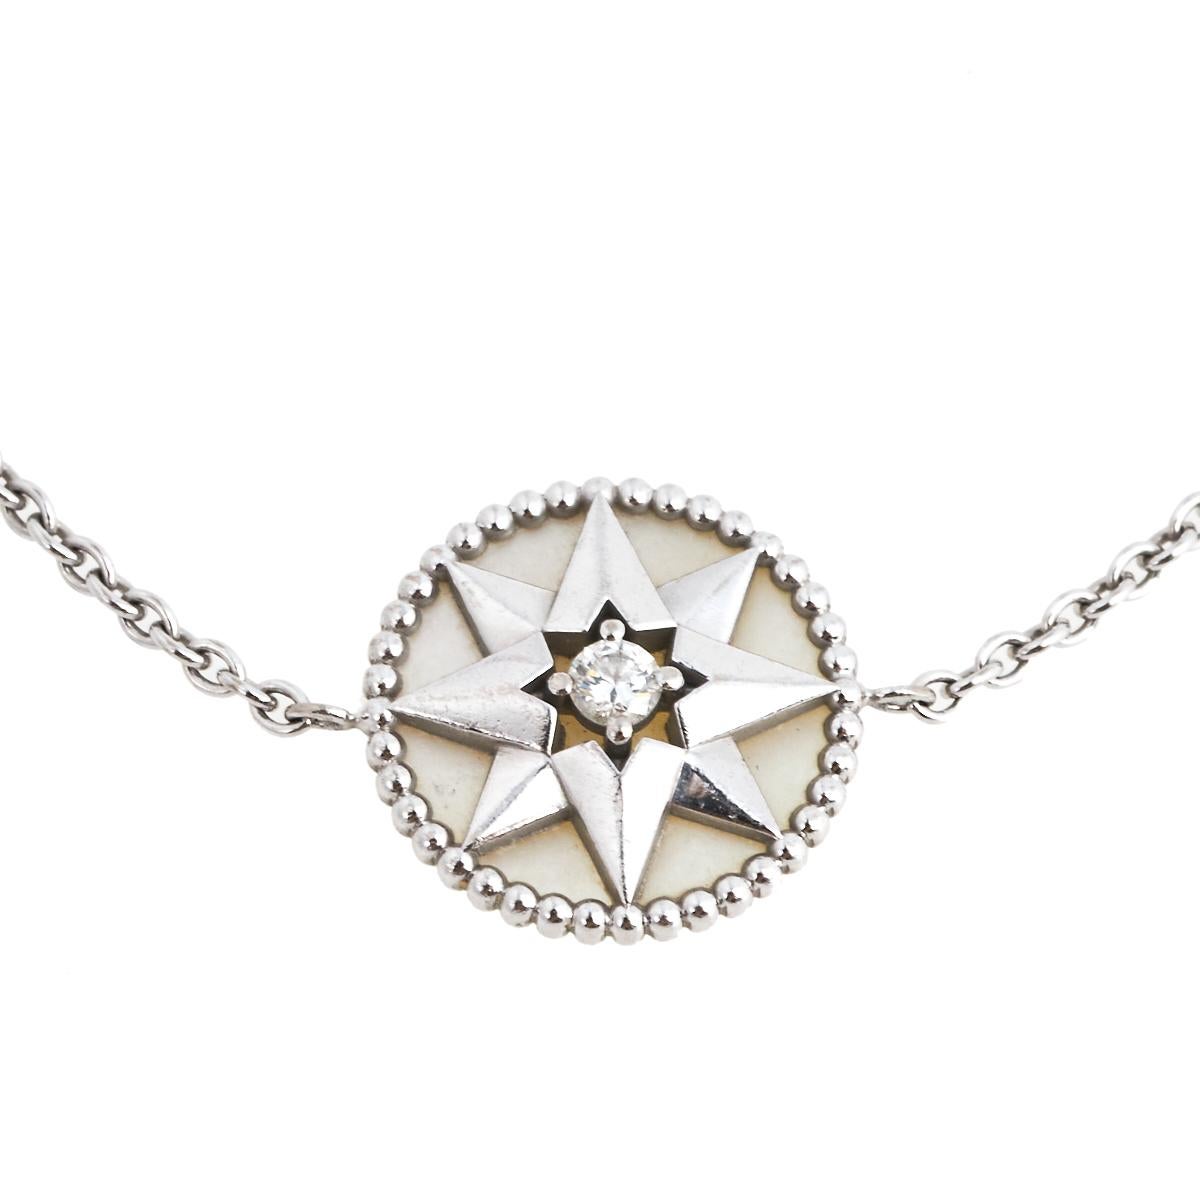 Victoire de Castellane, the Creative Director of Dior's fine jewelry division, gives a spin to the House's star symbol in this Rose des Vents bracelet using the windrose or Rose of the Winds, which is an eight-pointed star. The bracelet comes made